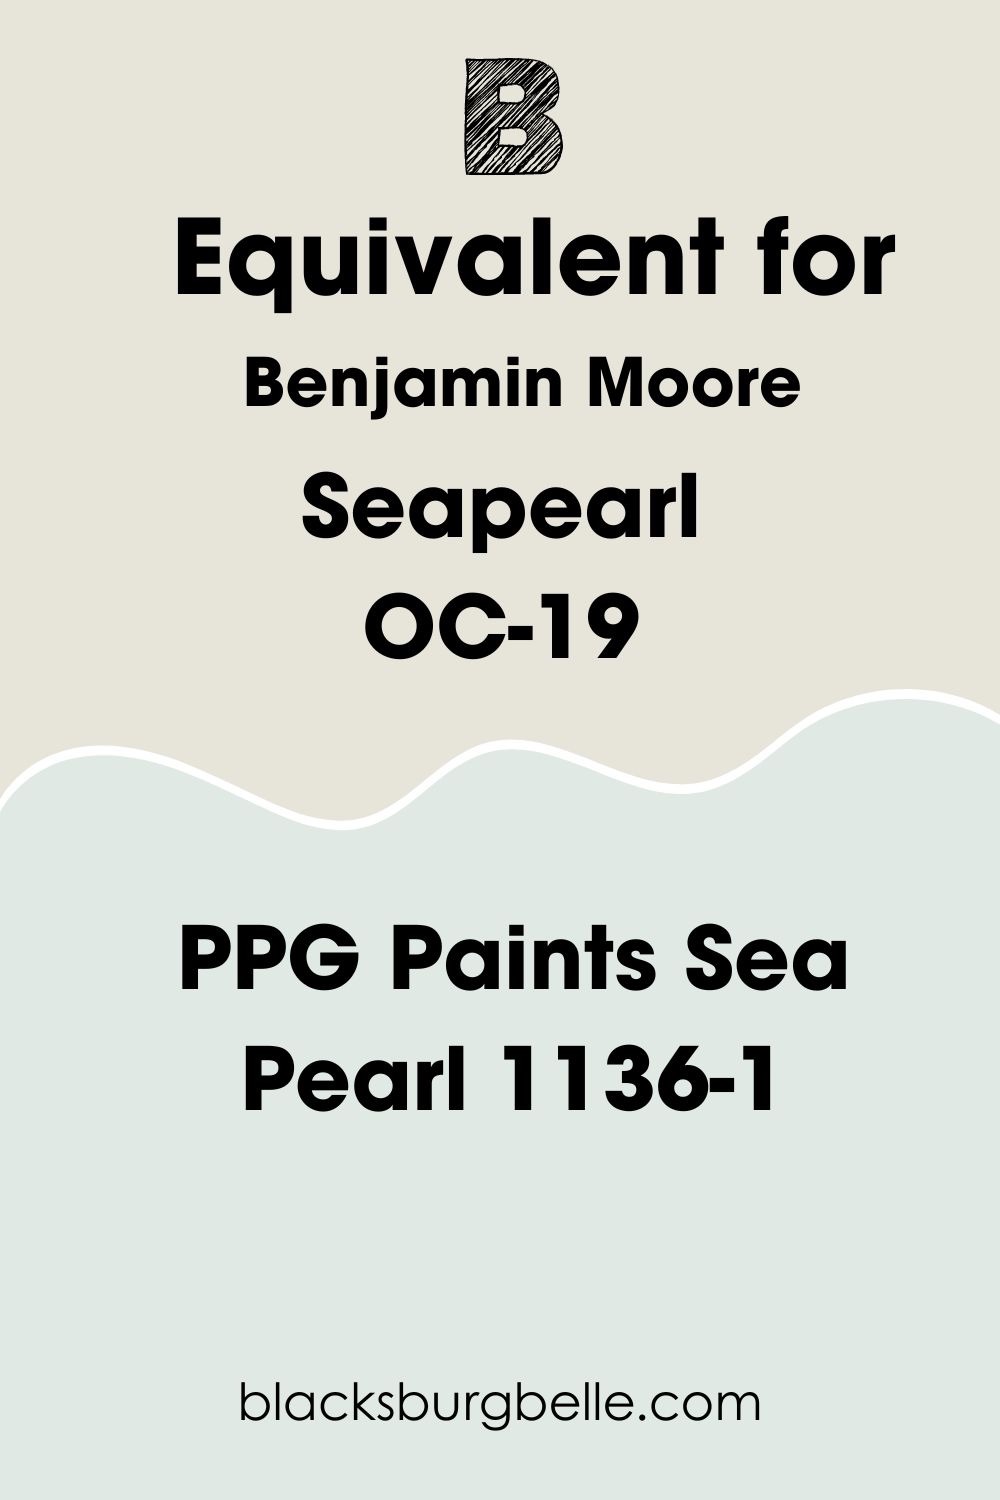 PPG Paints Sea Pearl 1136-1 